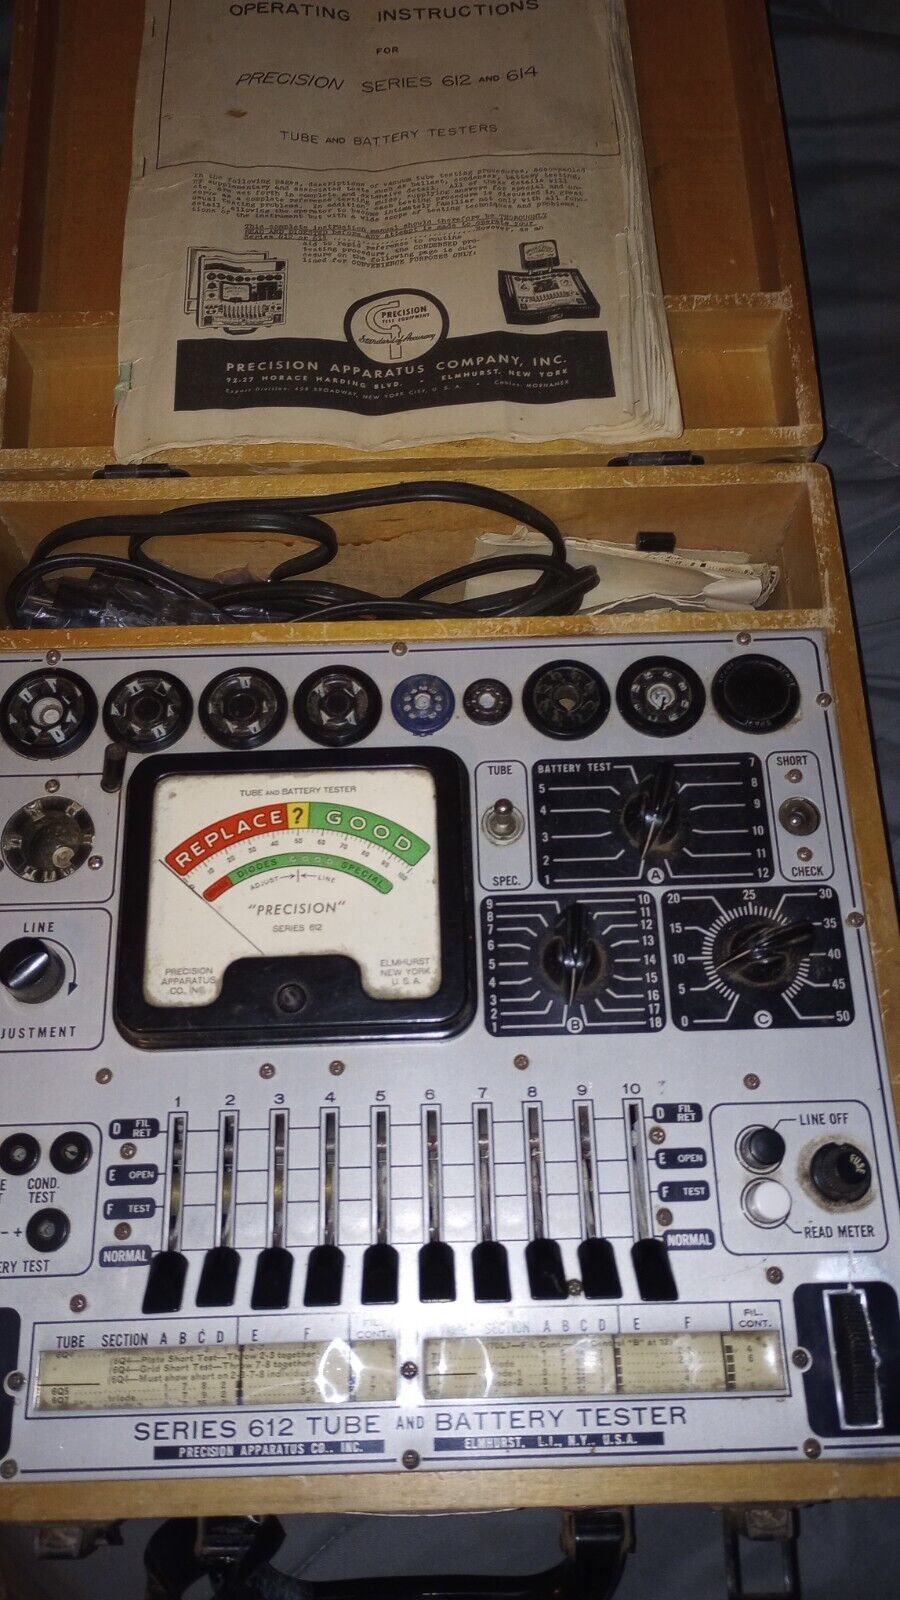 Qty 1 Used Tube Tester Works Great, Series 612-614 With Manual And Attachments